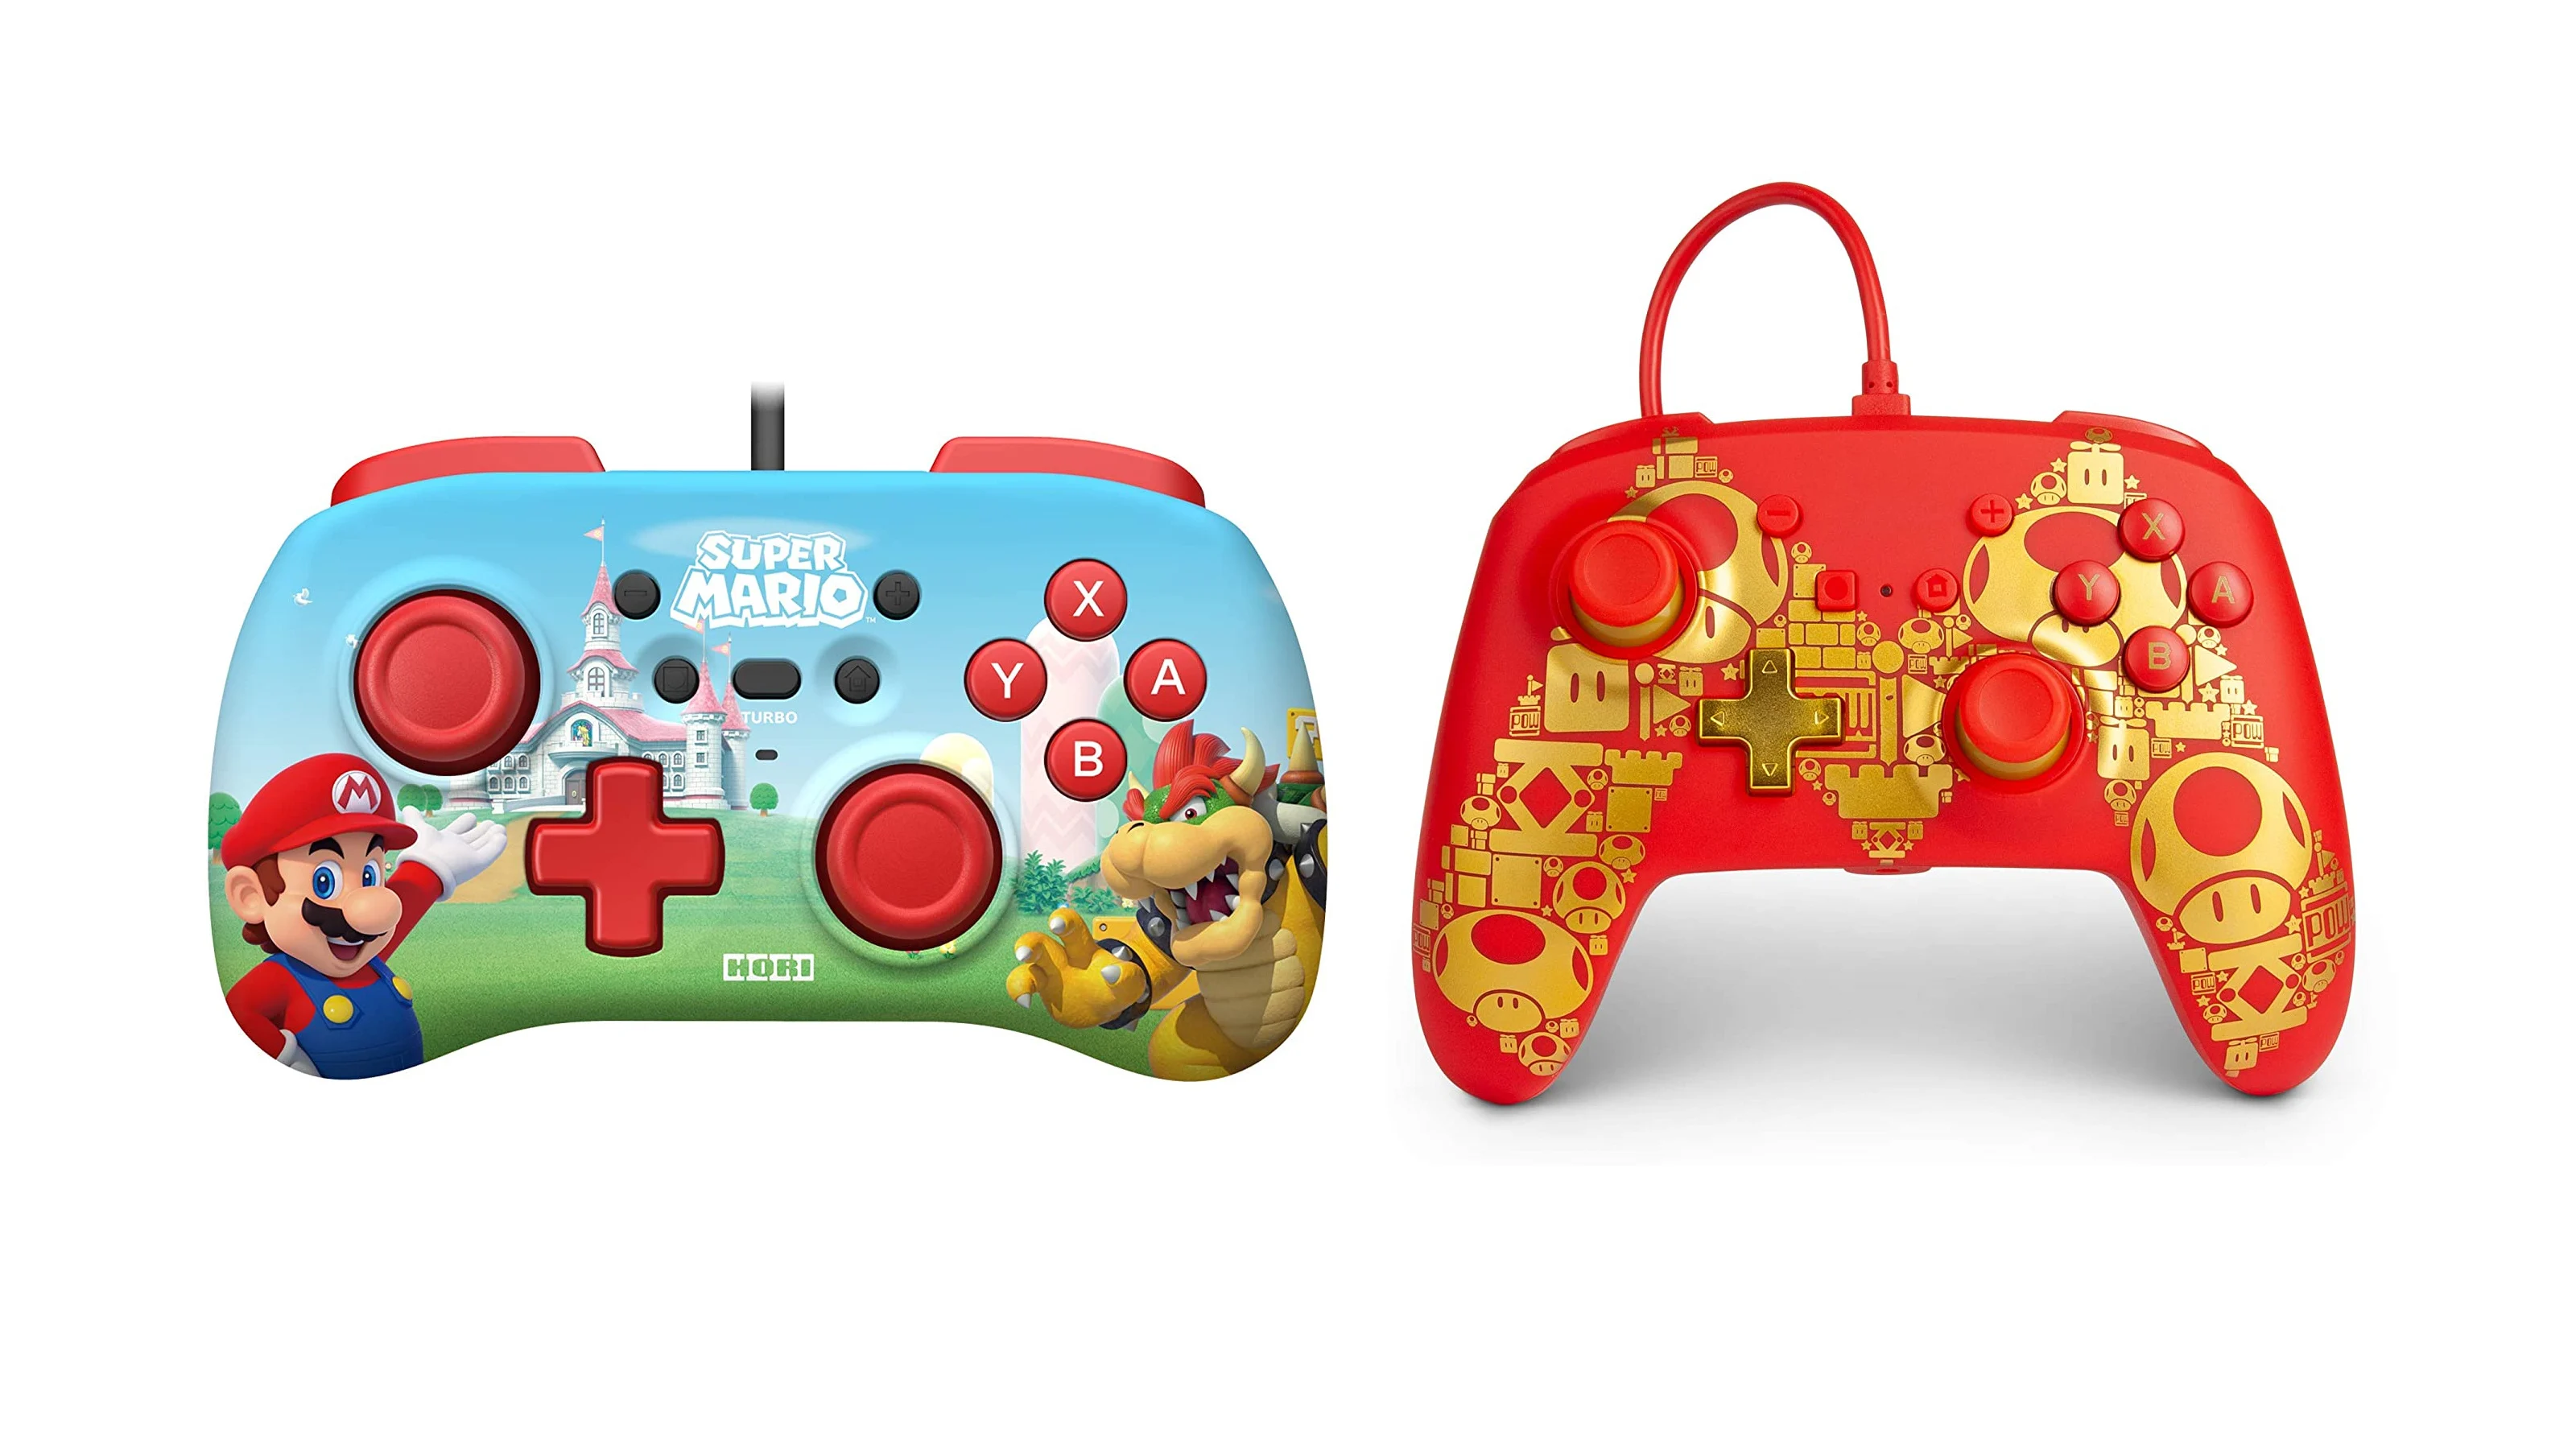 Mario celebrates the 35th anniversary of the series with two swish Nintendo Switch controllers